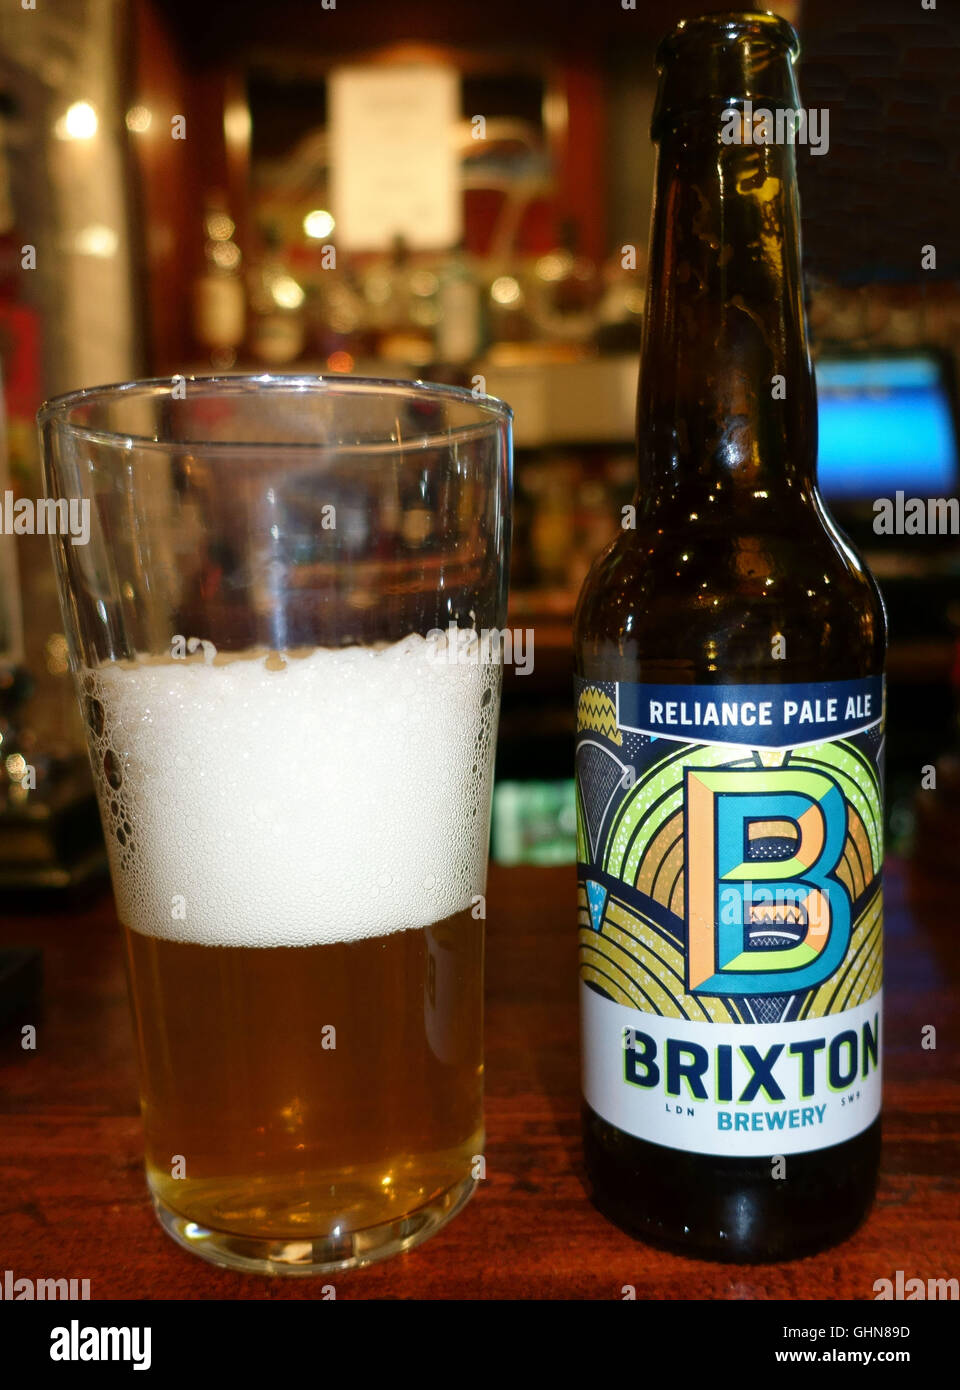 Reliance Pale Ale by Brixton Brewery, London Stock Photo